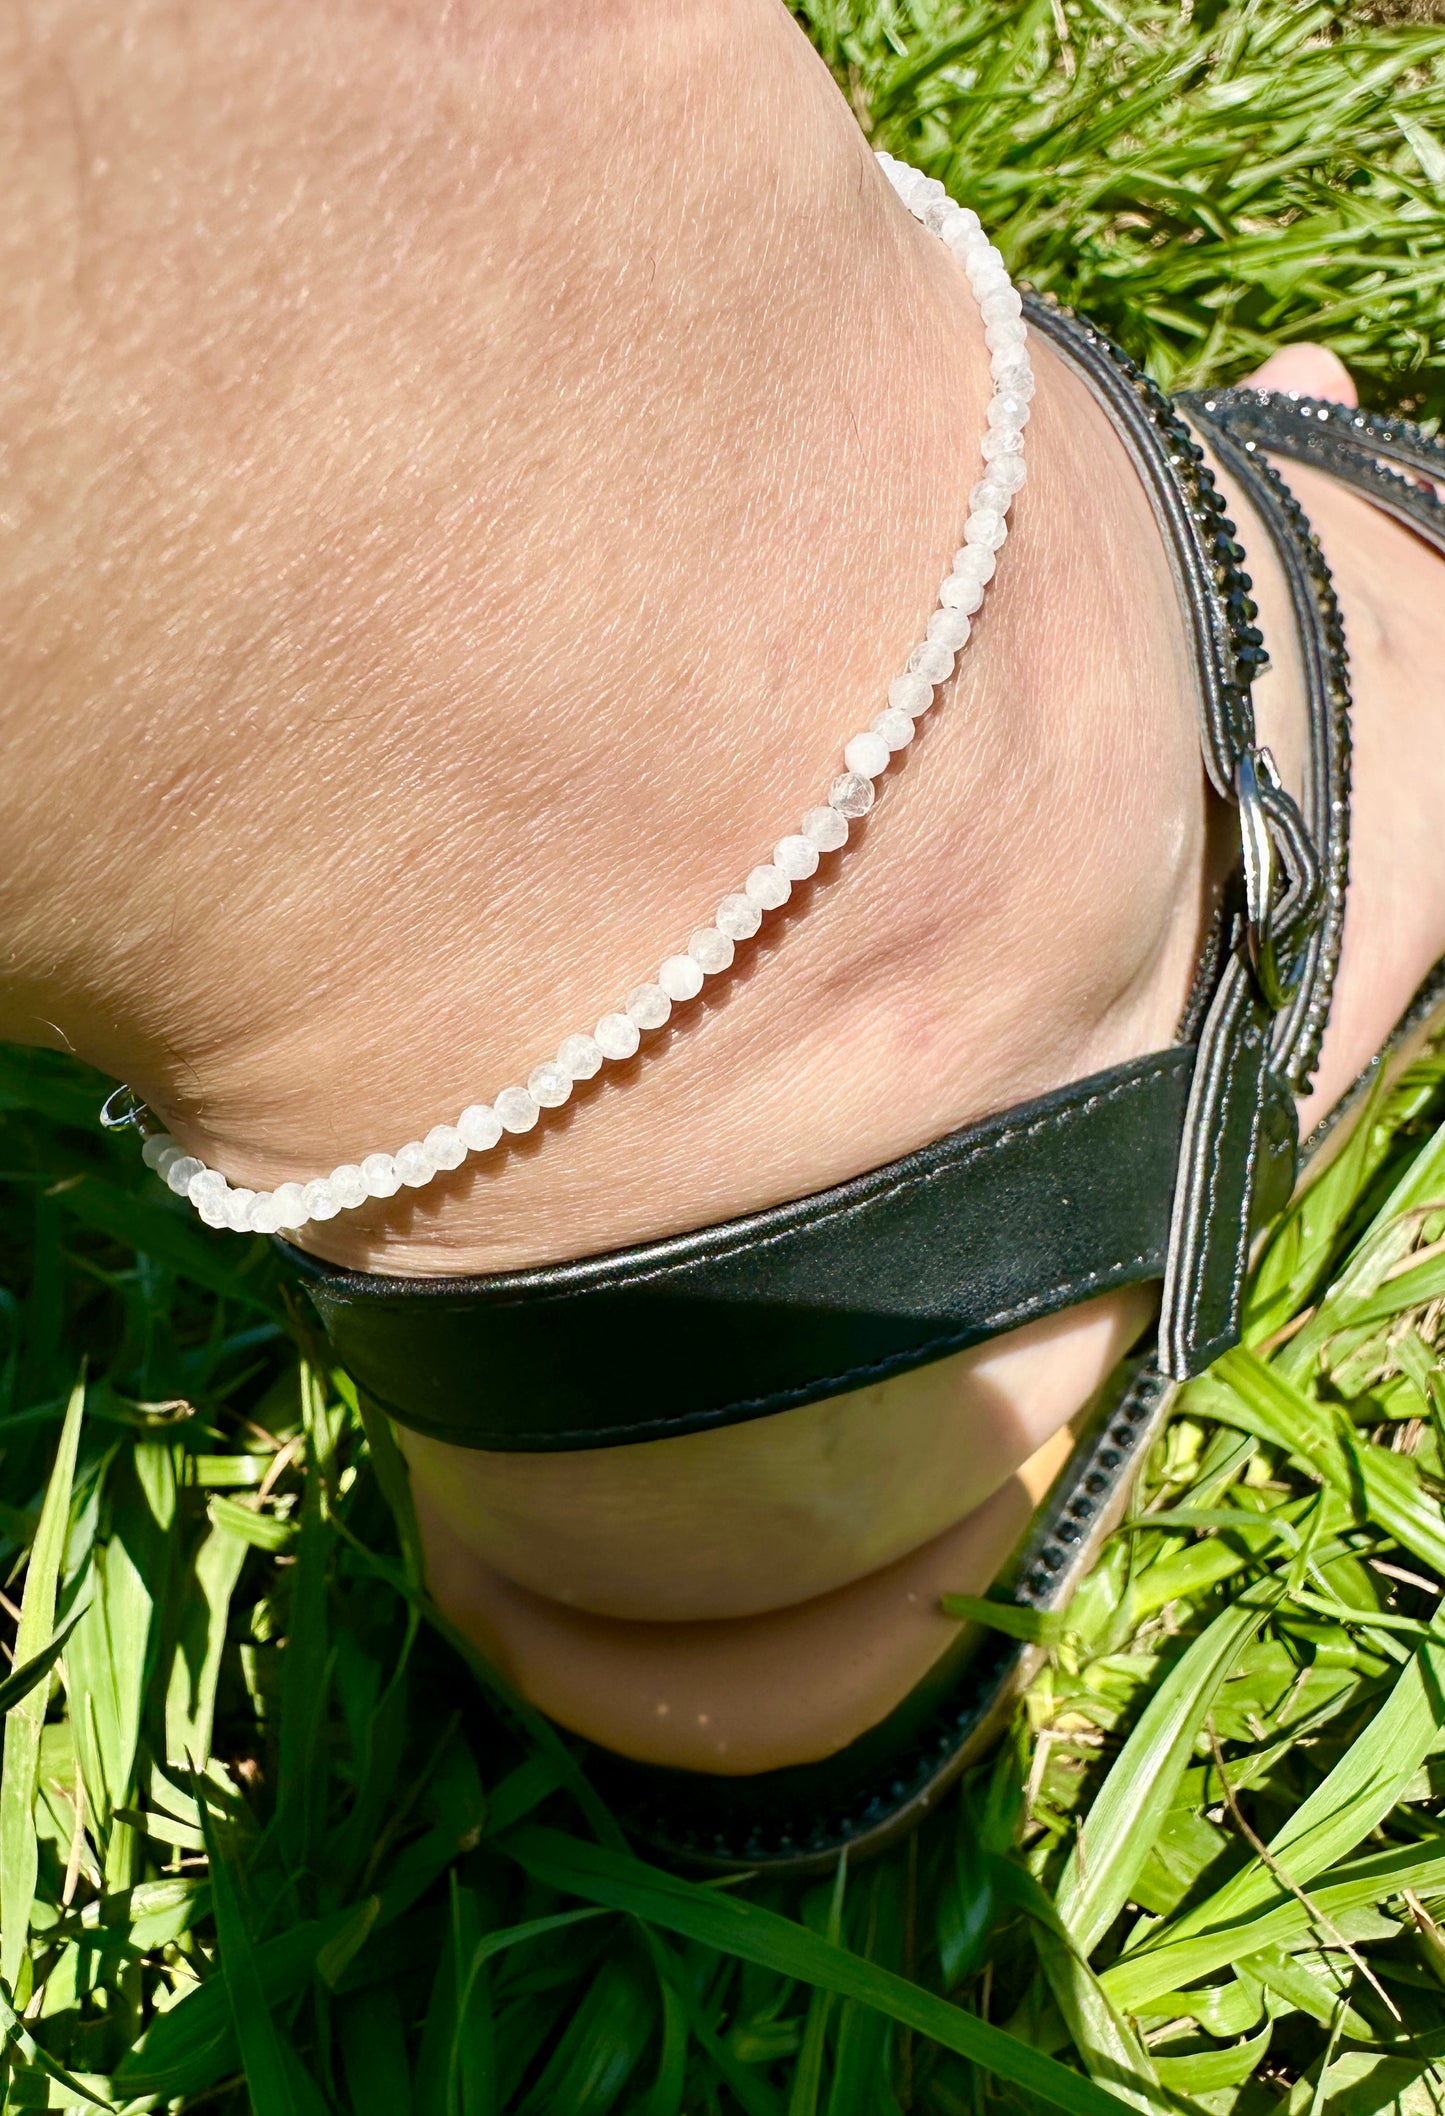 White Quartz Faceted Ankle Bracelet - Adjustable Elegant Anklet, Silver Chain, Perfect Summer Accessory, Chic and Sparkling Jewelry